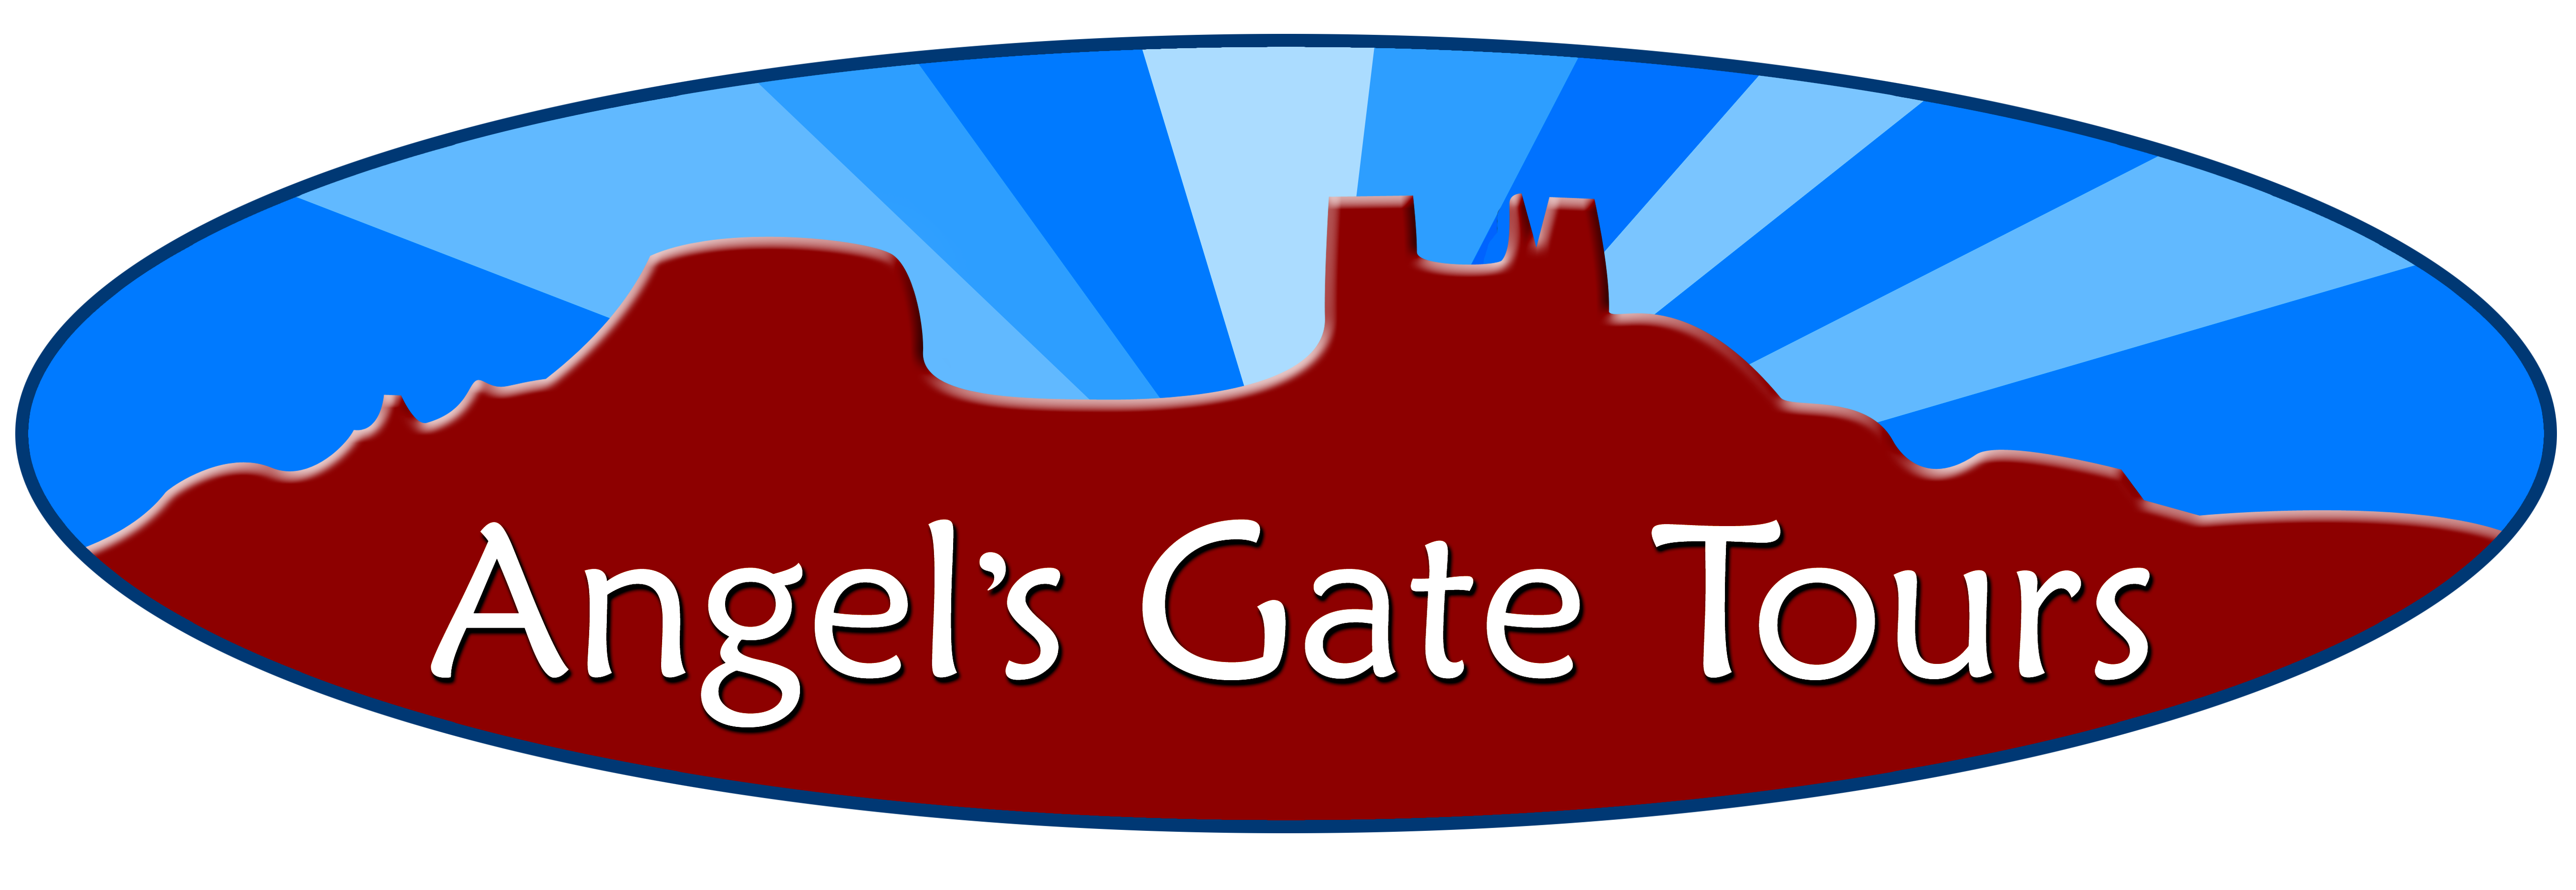 Angel's Gate Tours